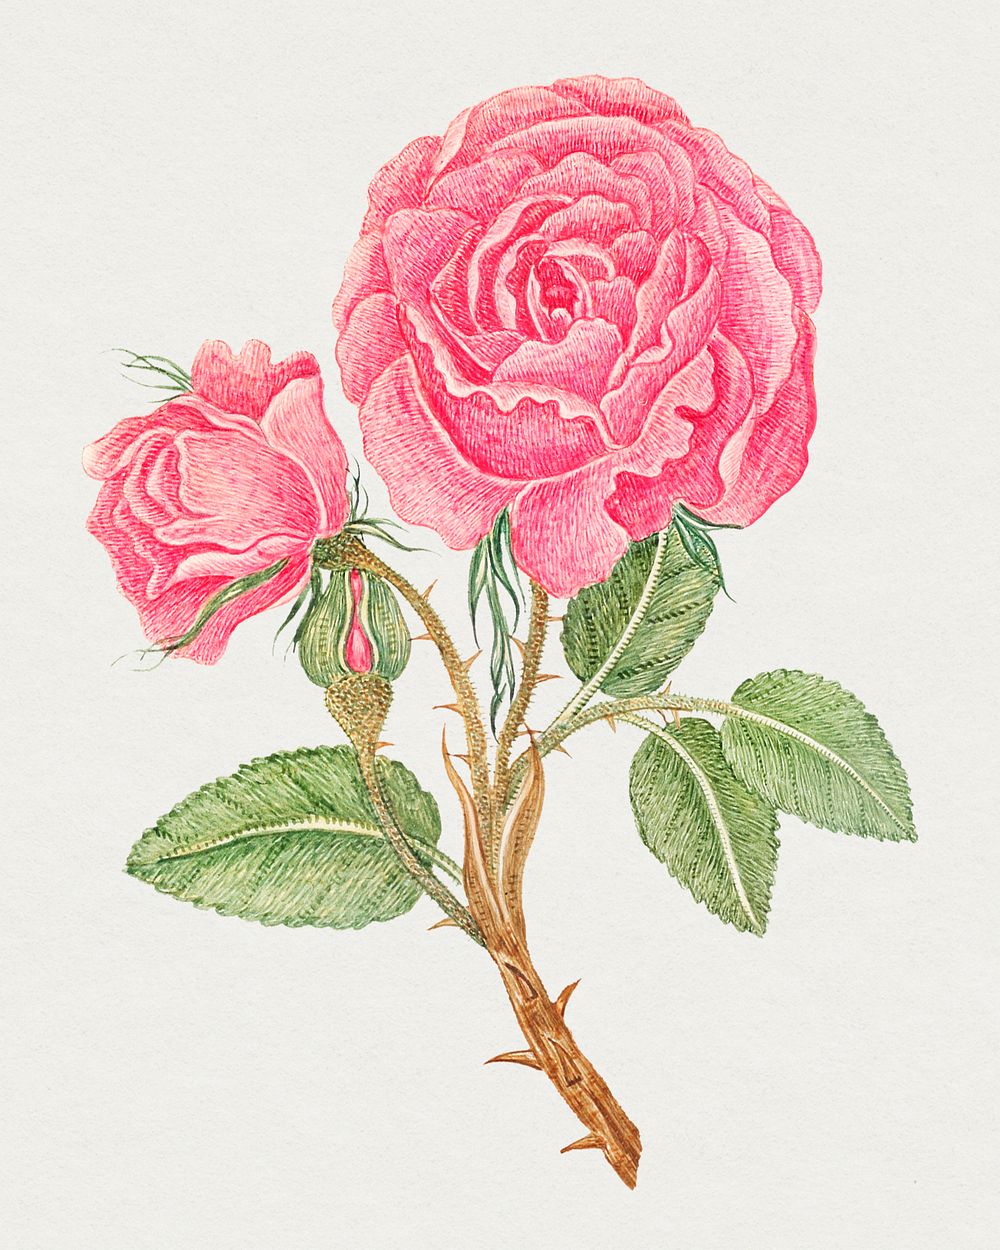 Vintage pink rose illustration, remixed from the 18th-century artworks from the Smithsonian archive.